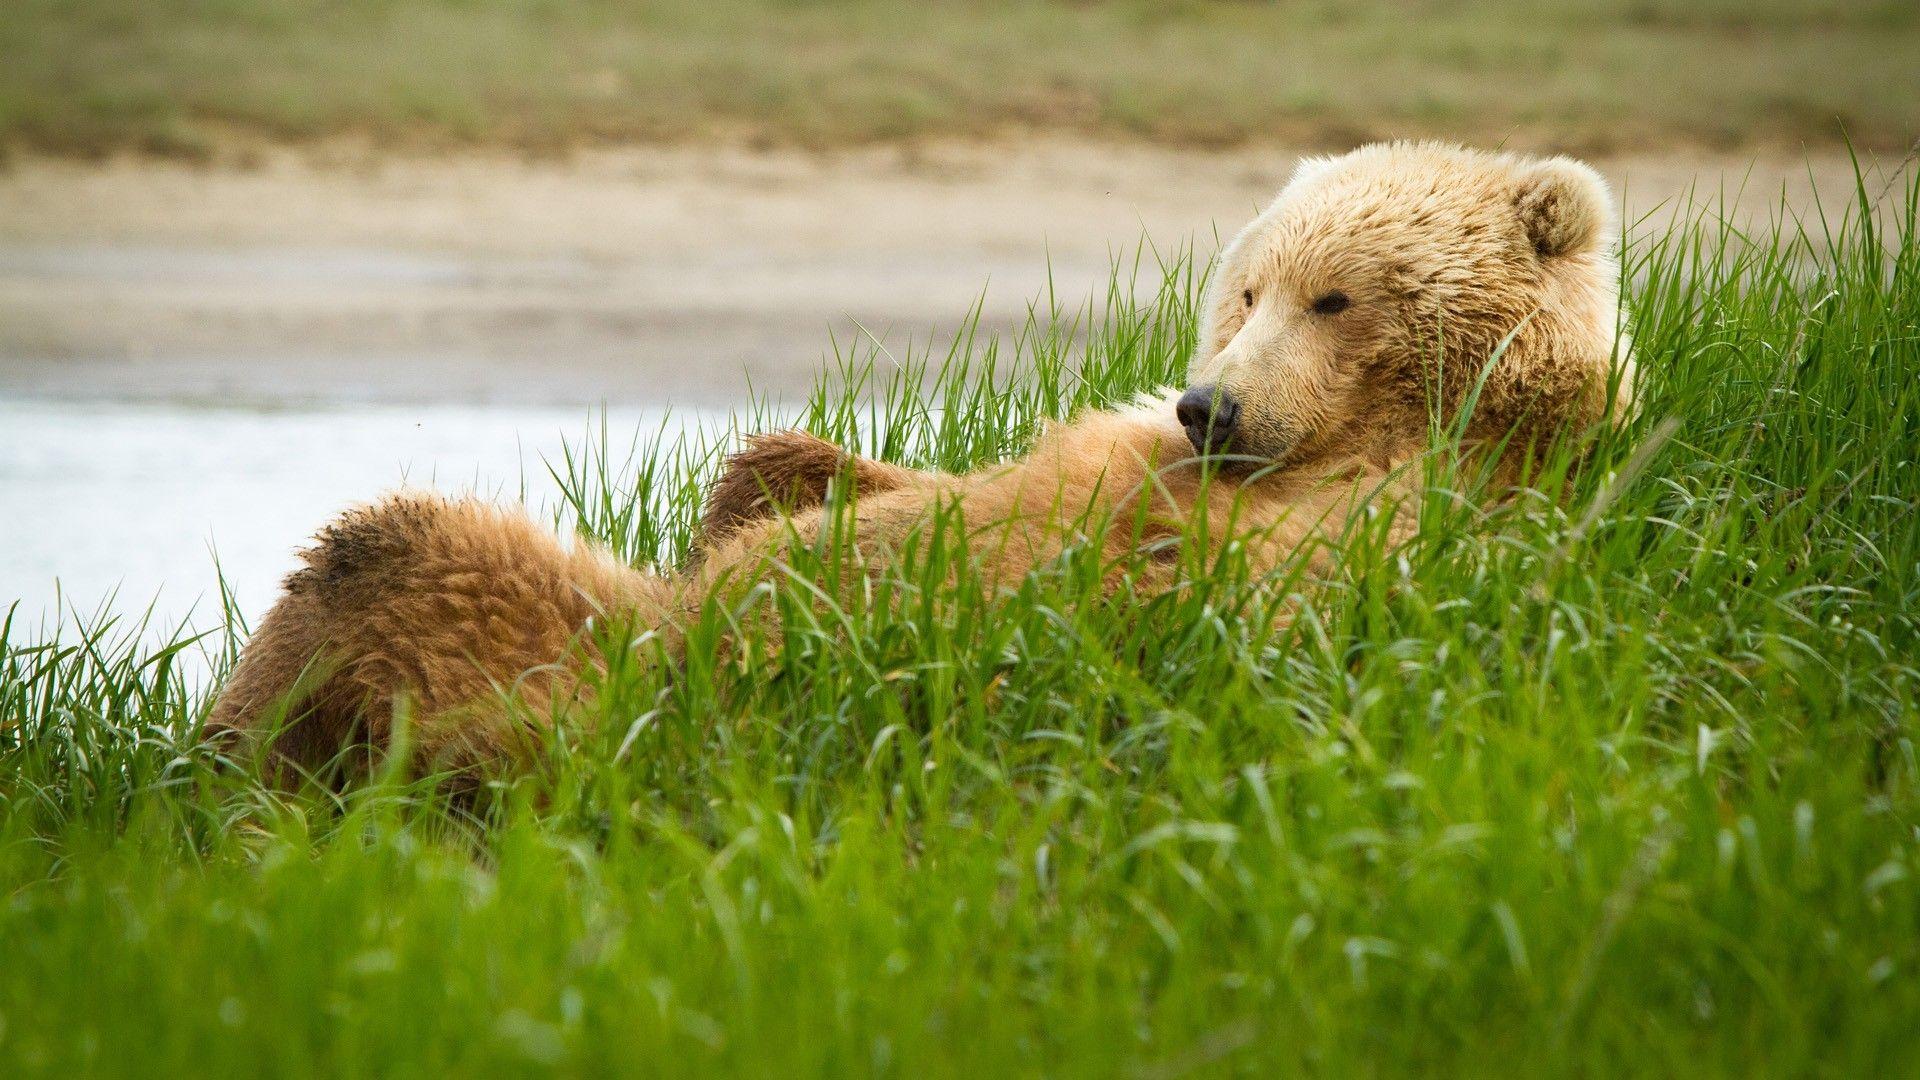 Download Wallpaper 1920x1080 Grizzly, Bear, Grass, Lie, Funny Full